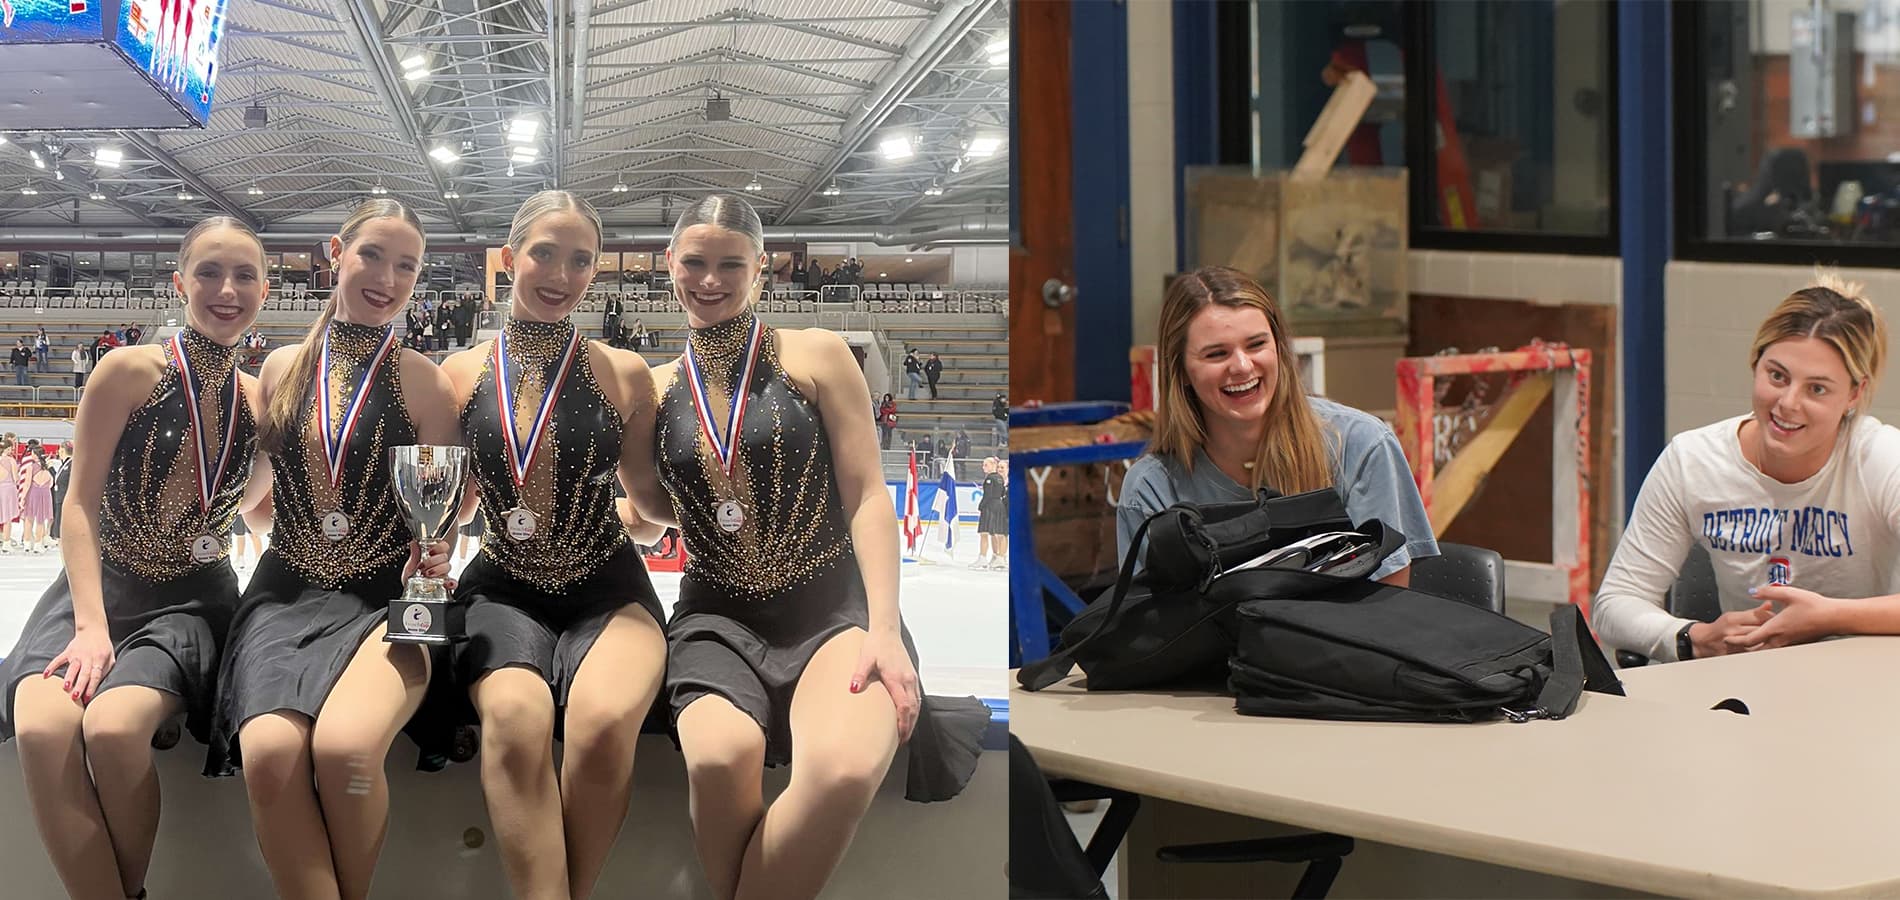 At left, four skaters wearing medals sit on the boards next to an ice rink with other people behind them. On the right, two ɫۺϾþ Mercy students sit laughing inside of the College of Engineering & Sciences Building.